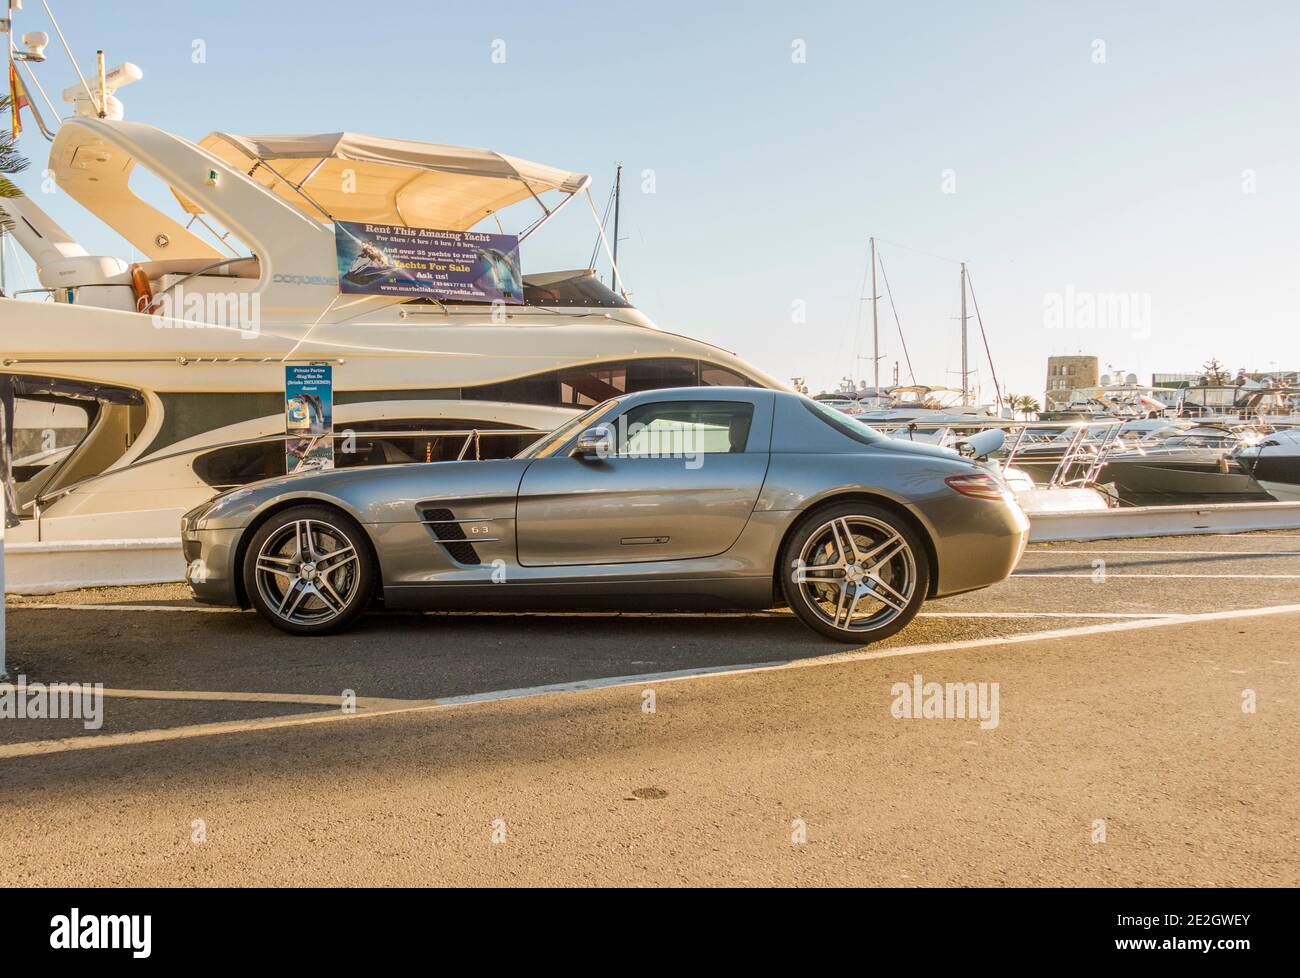 Puerto Banús, with luxury cars parked in port, Yachts behind, Marbella, Nueva Andalucia, Costa del sol, Andalucia, Spain. Stock Photo